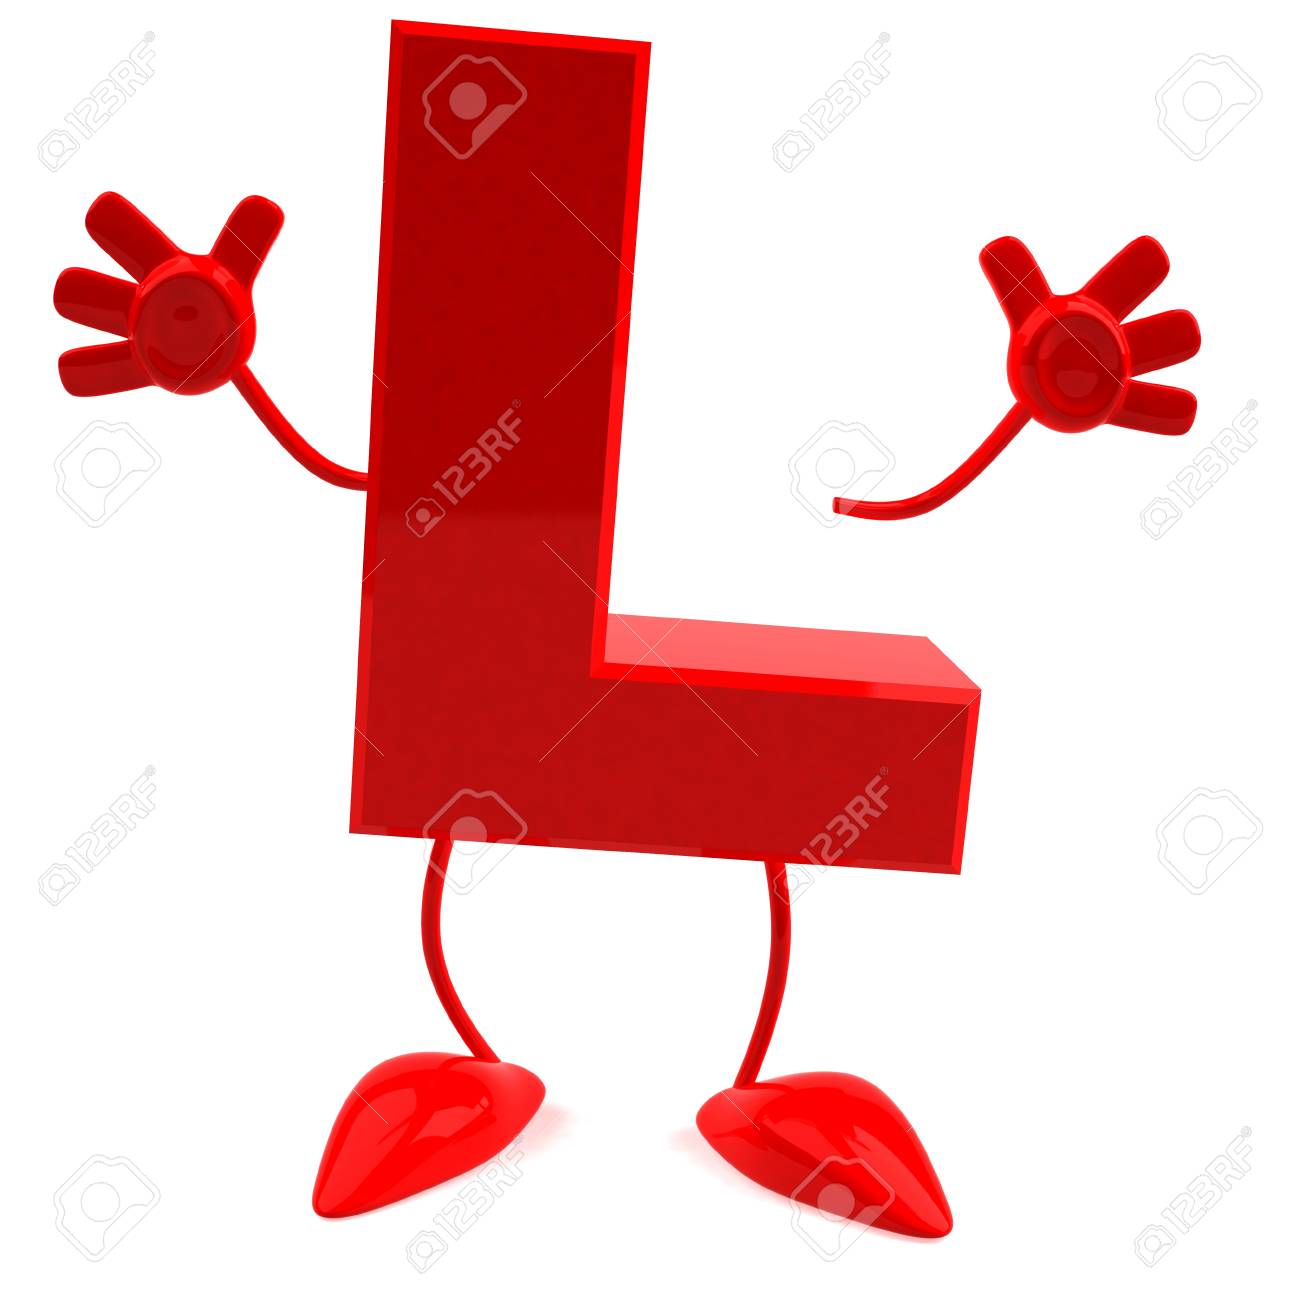 Cartoon Character Of Letter L Stock Photo, Picture And Royalty - The Letter  L Photo (44600190) - Fanpop